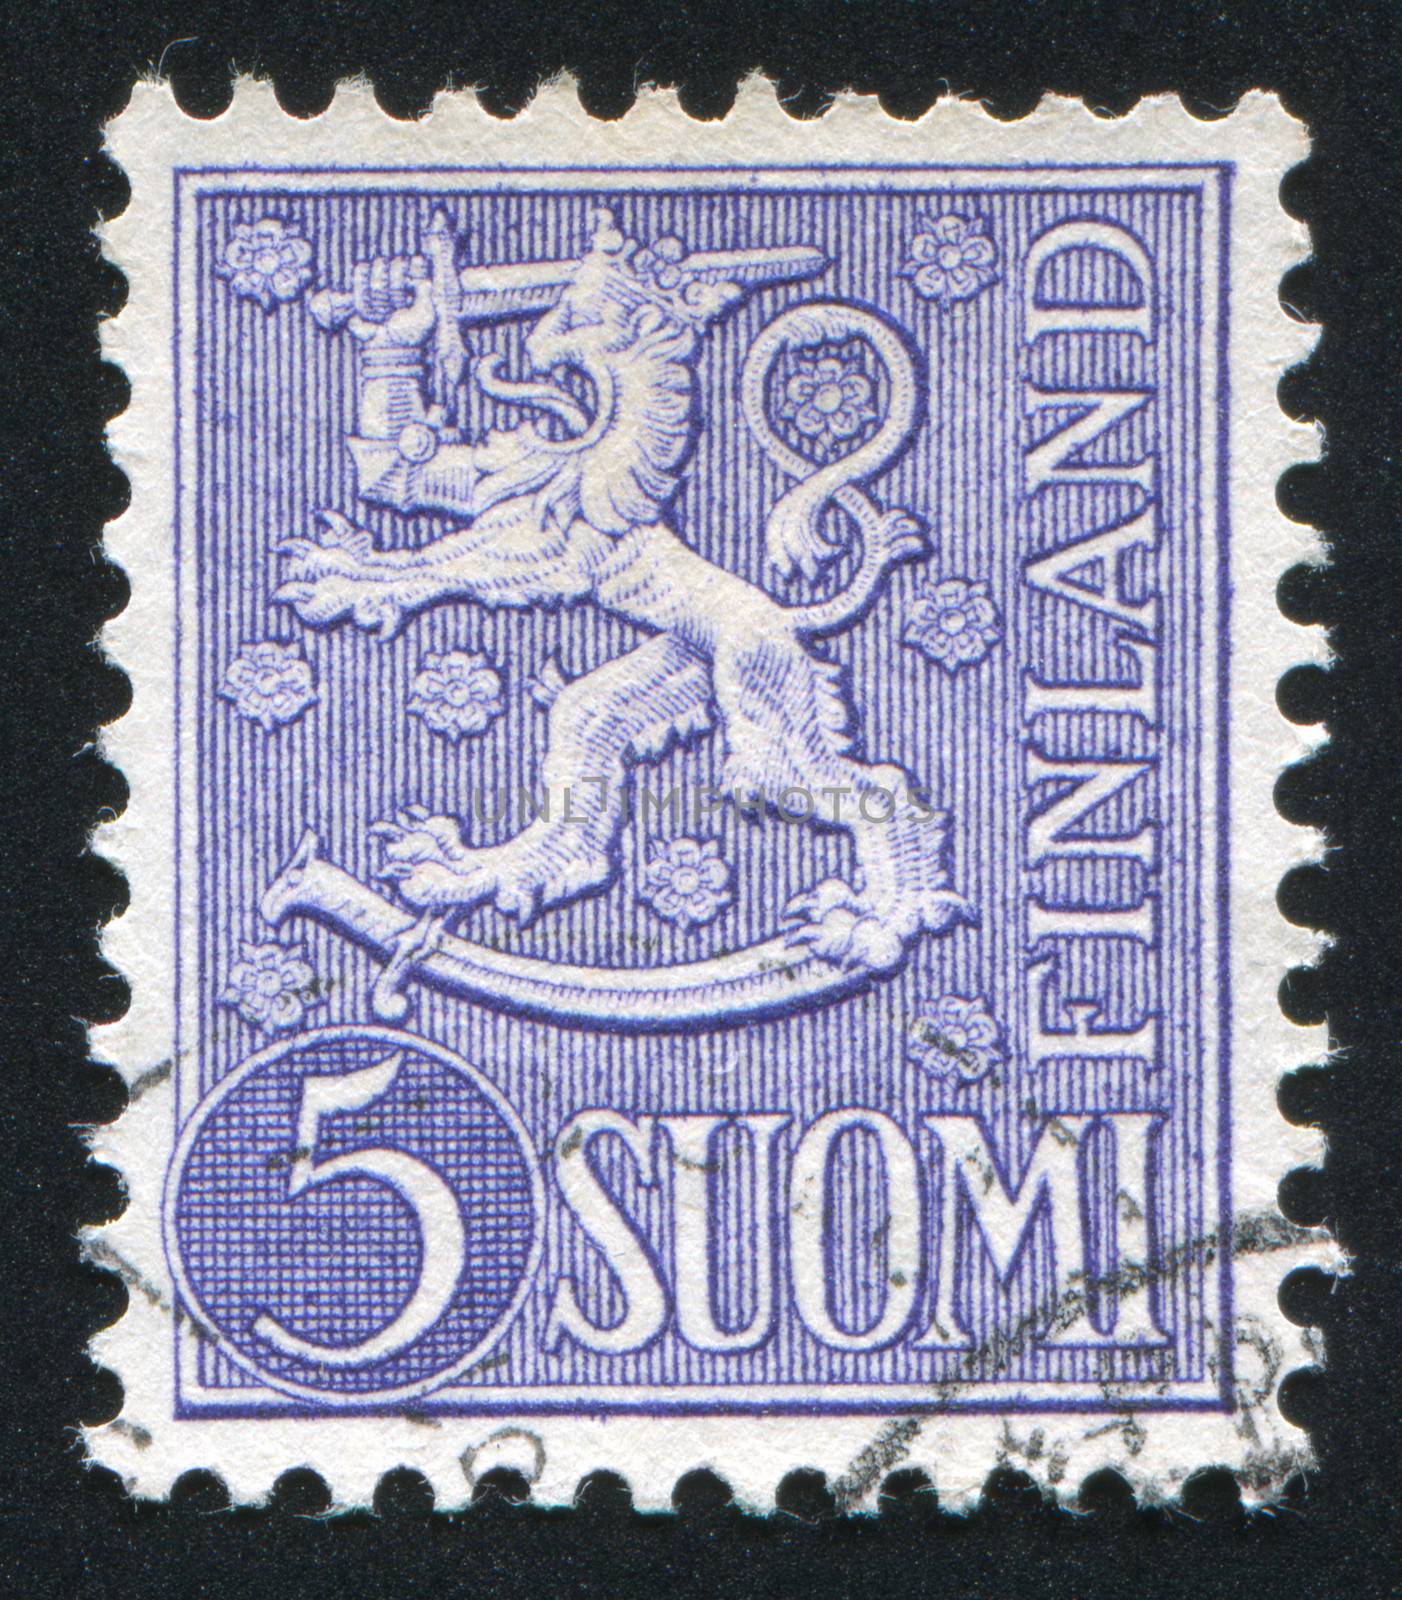 FINLAND - CIRCA 1954: stamp printed by Finland, shows Coat of arms of Finland, circa 1954